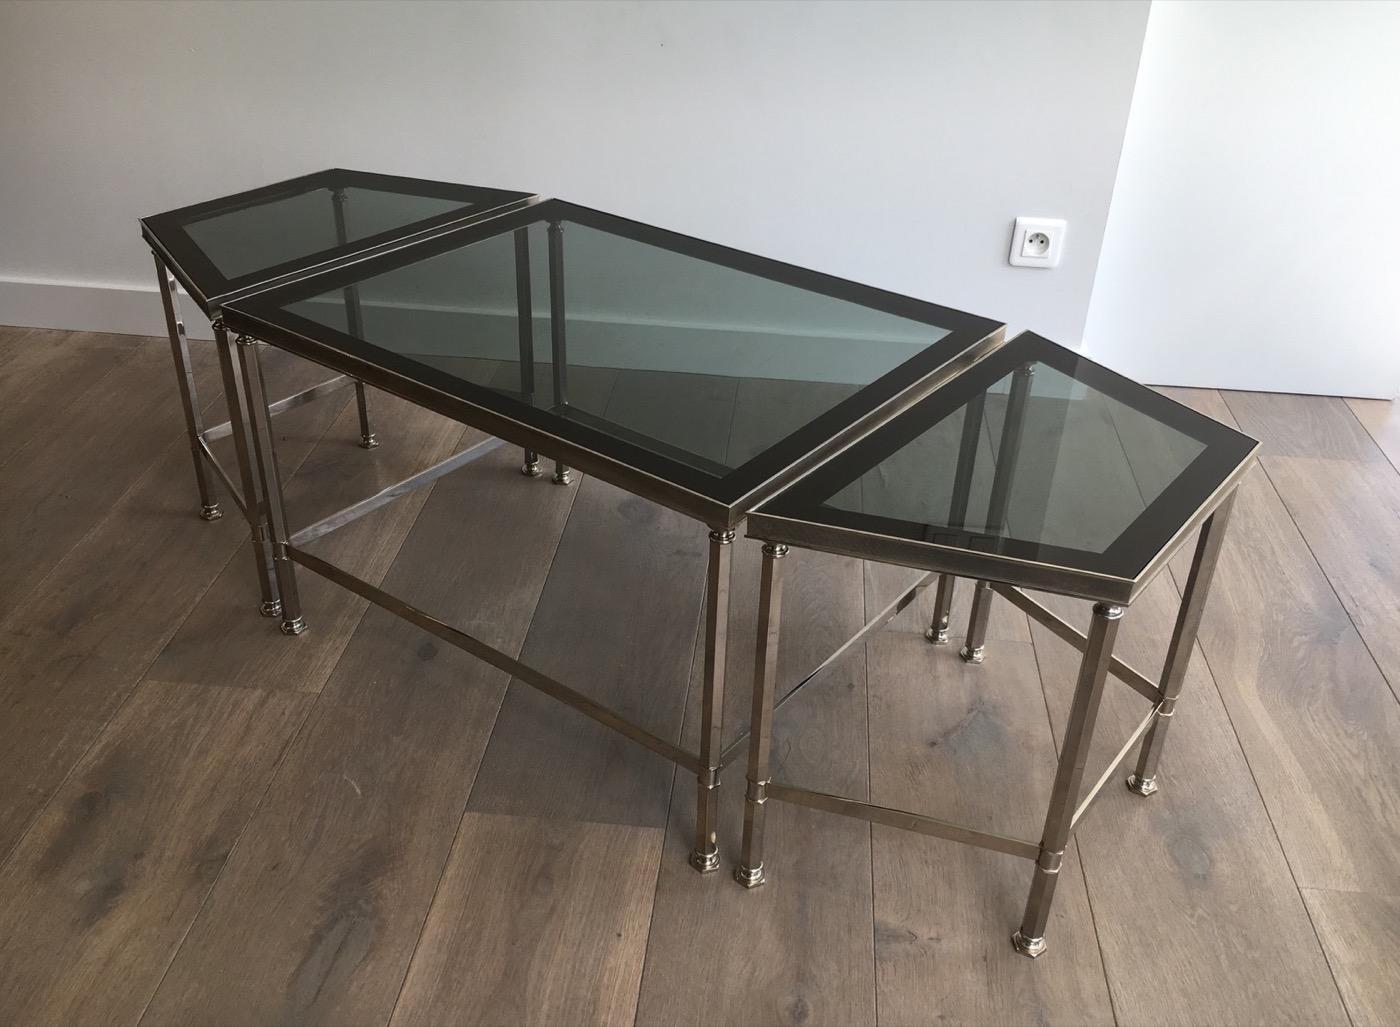 Rare Nickeled Tripartite Coffee Table with Glass Tops Lacquered All Around For Sale 10